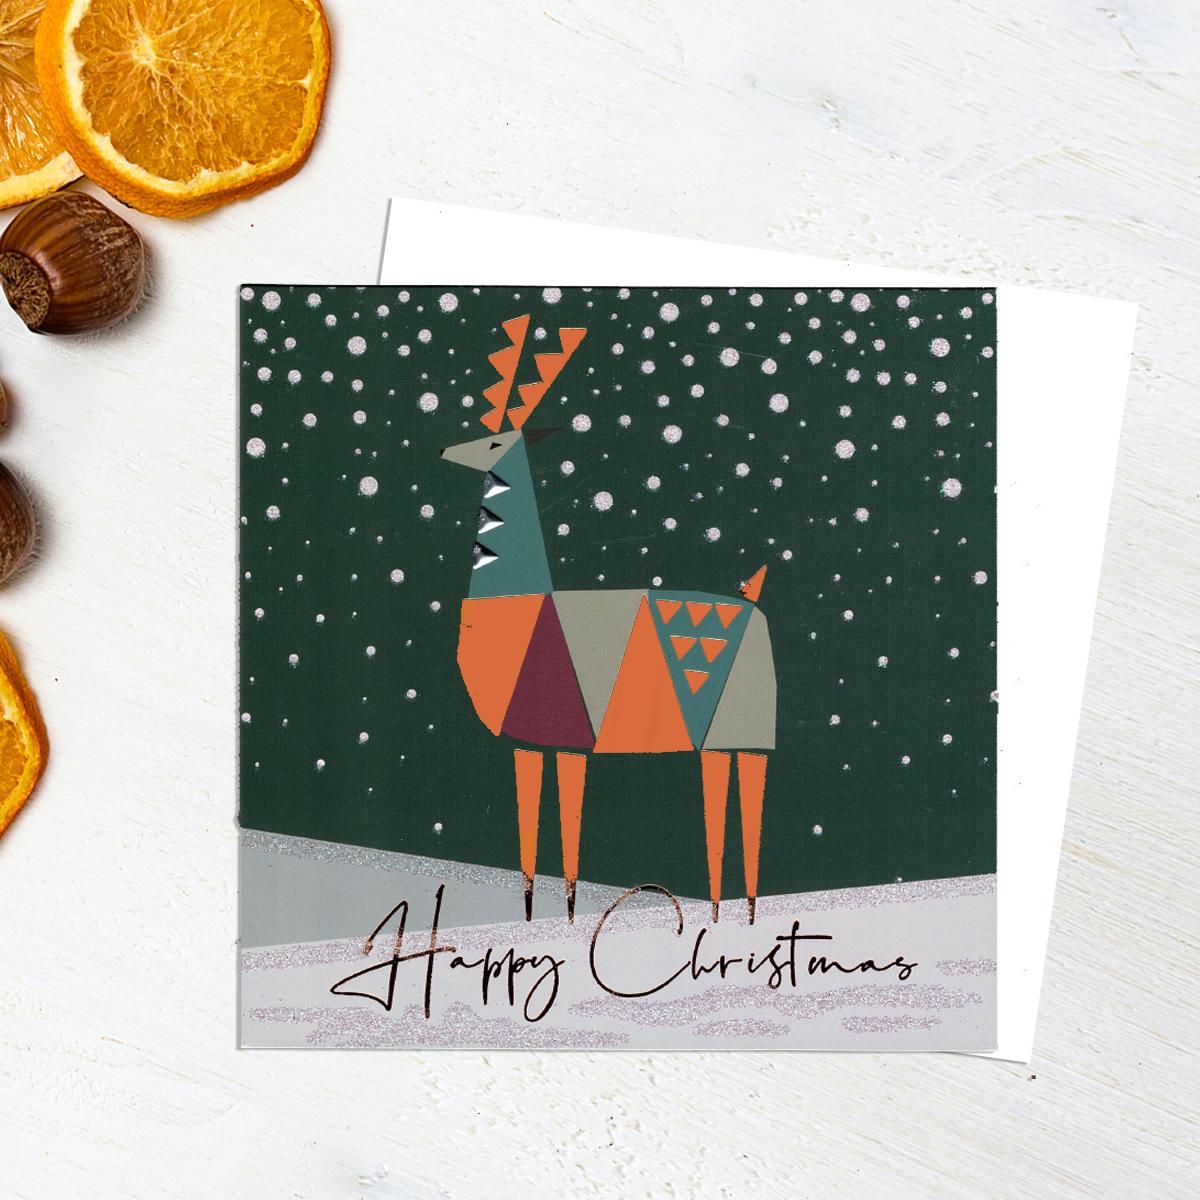 Beautiful, Contemporary Style Geometric Reindeer Christmas Card. With Added Gems And Sparkle. Complete With White Envelope